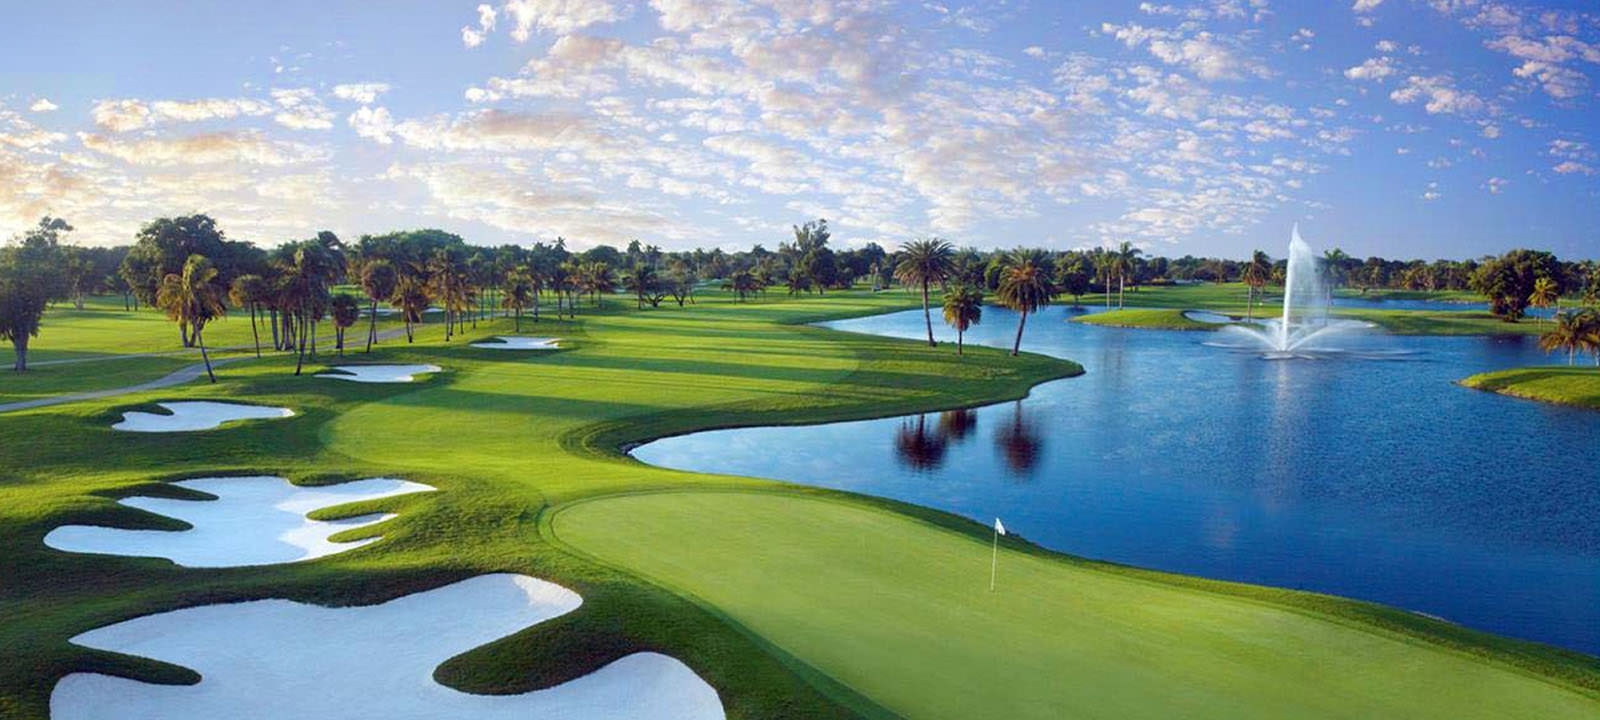 Golf Vacation Package - Doral Blue Monster